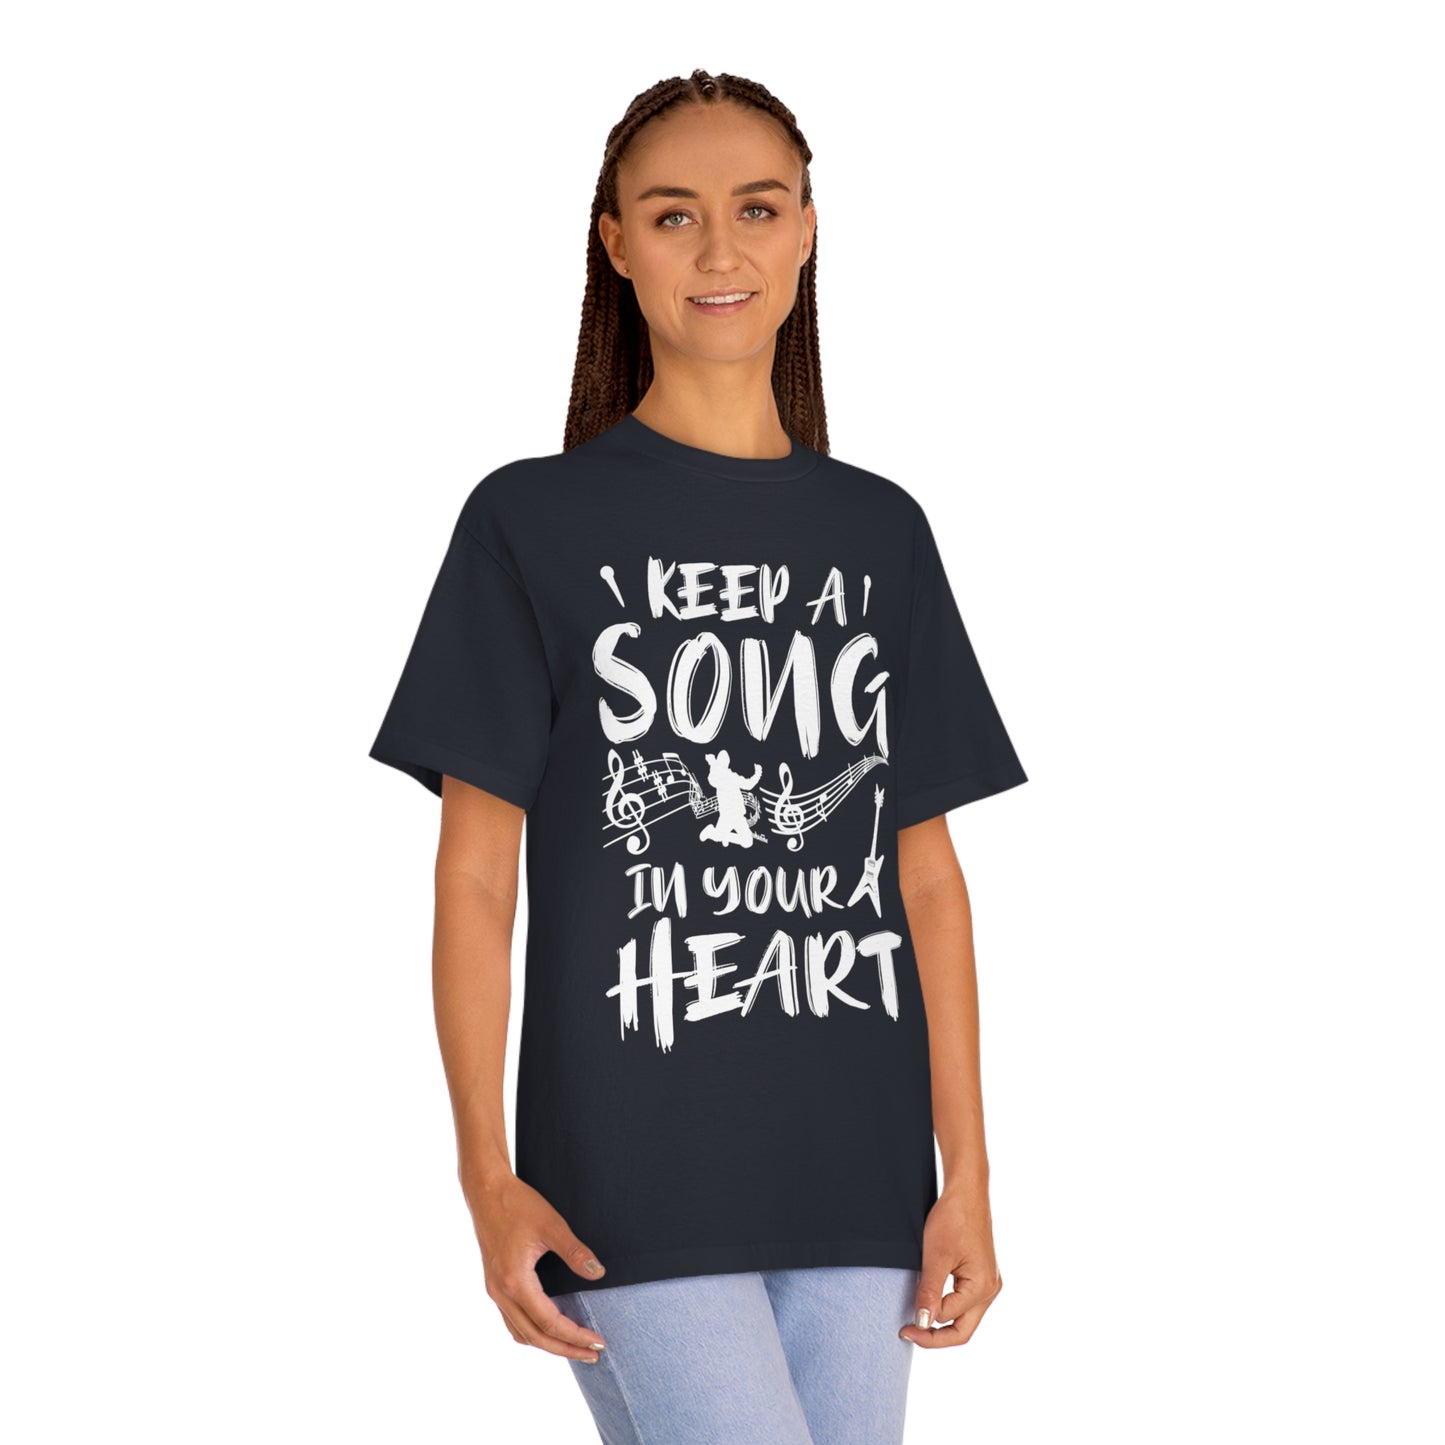 Keep a song in yours heart  Unisex Classic Tee